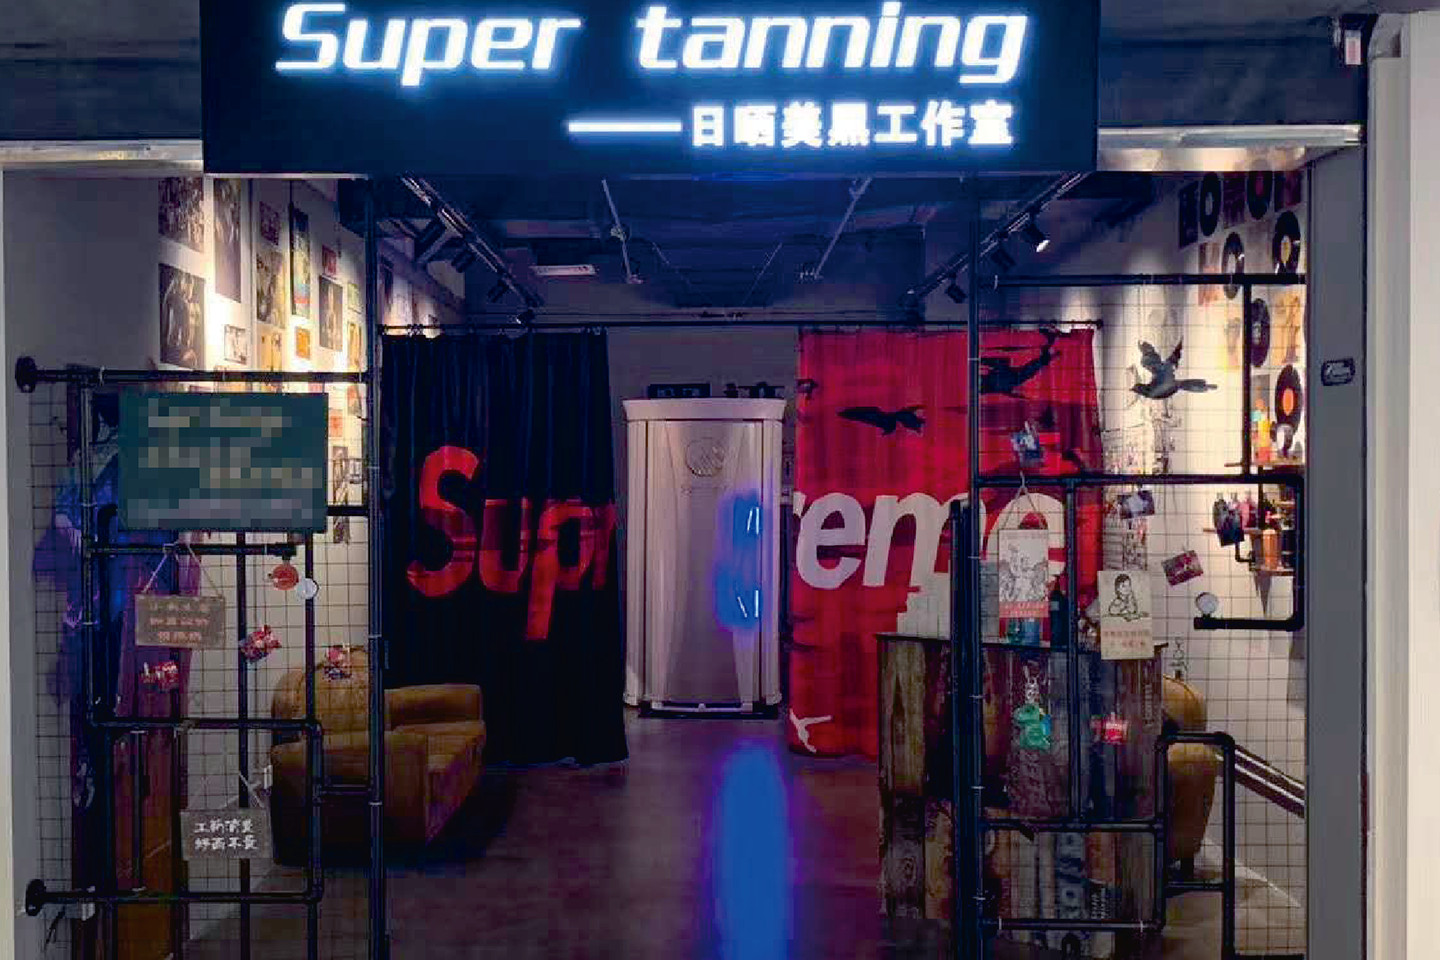 Super Tanning Centre, Tianjin, China